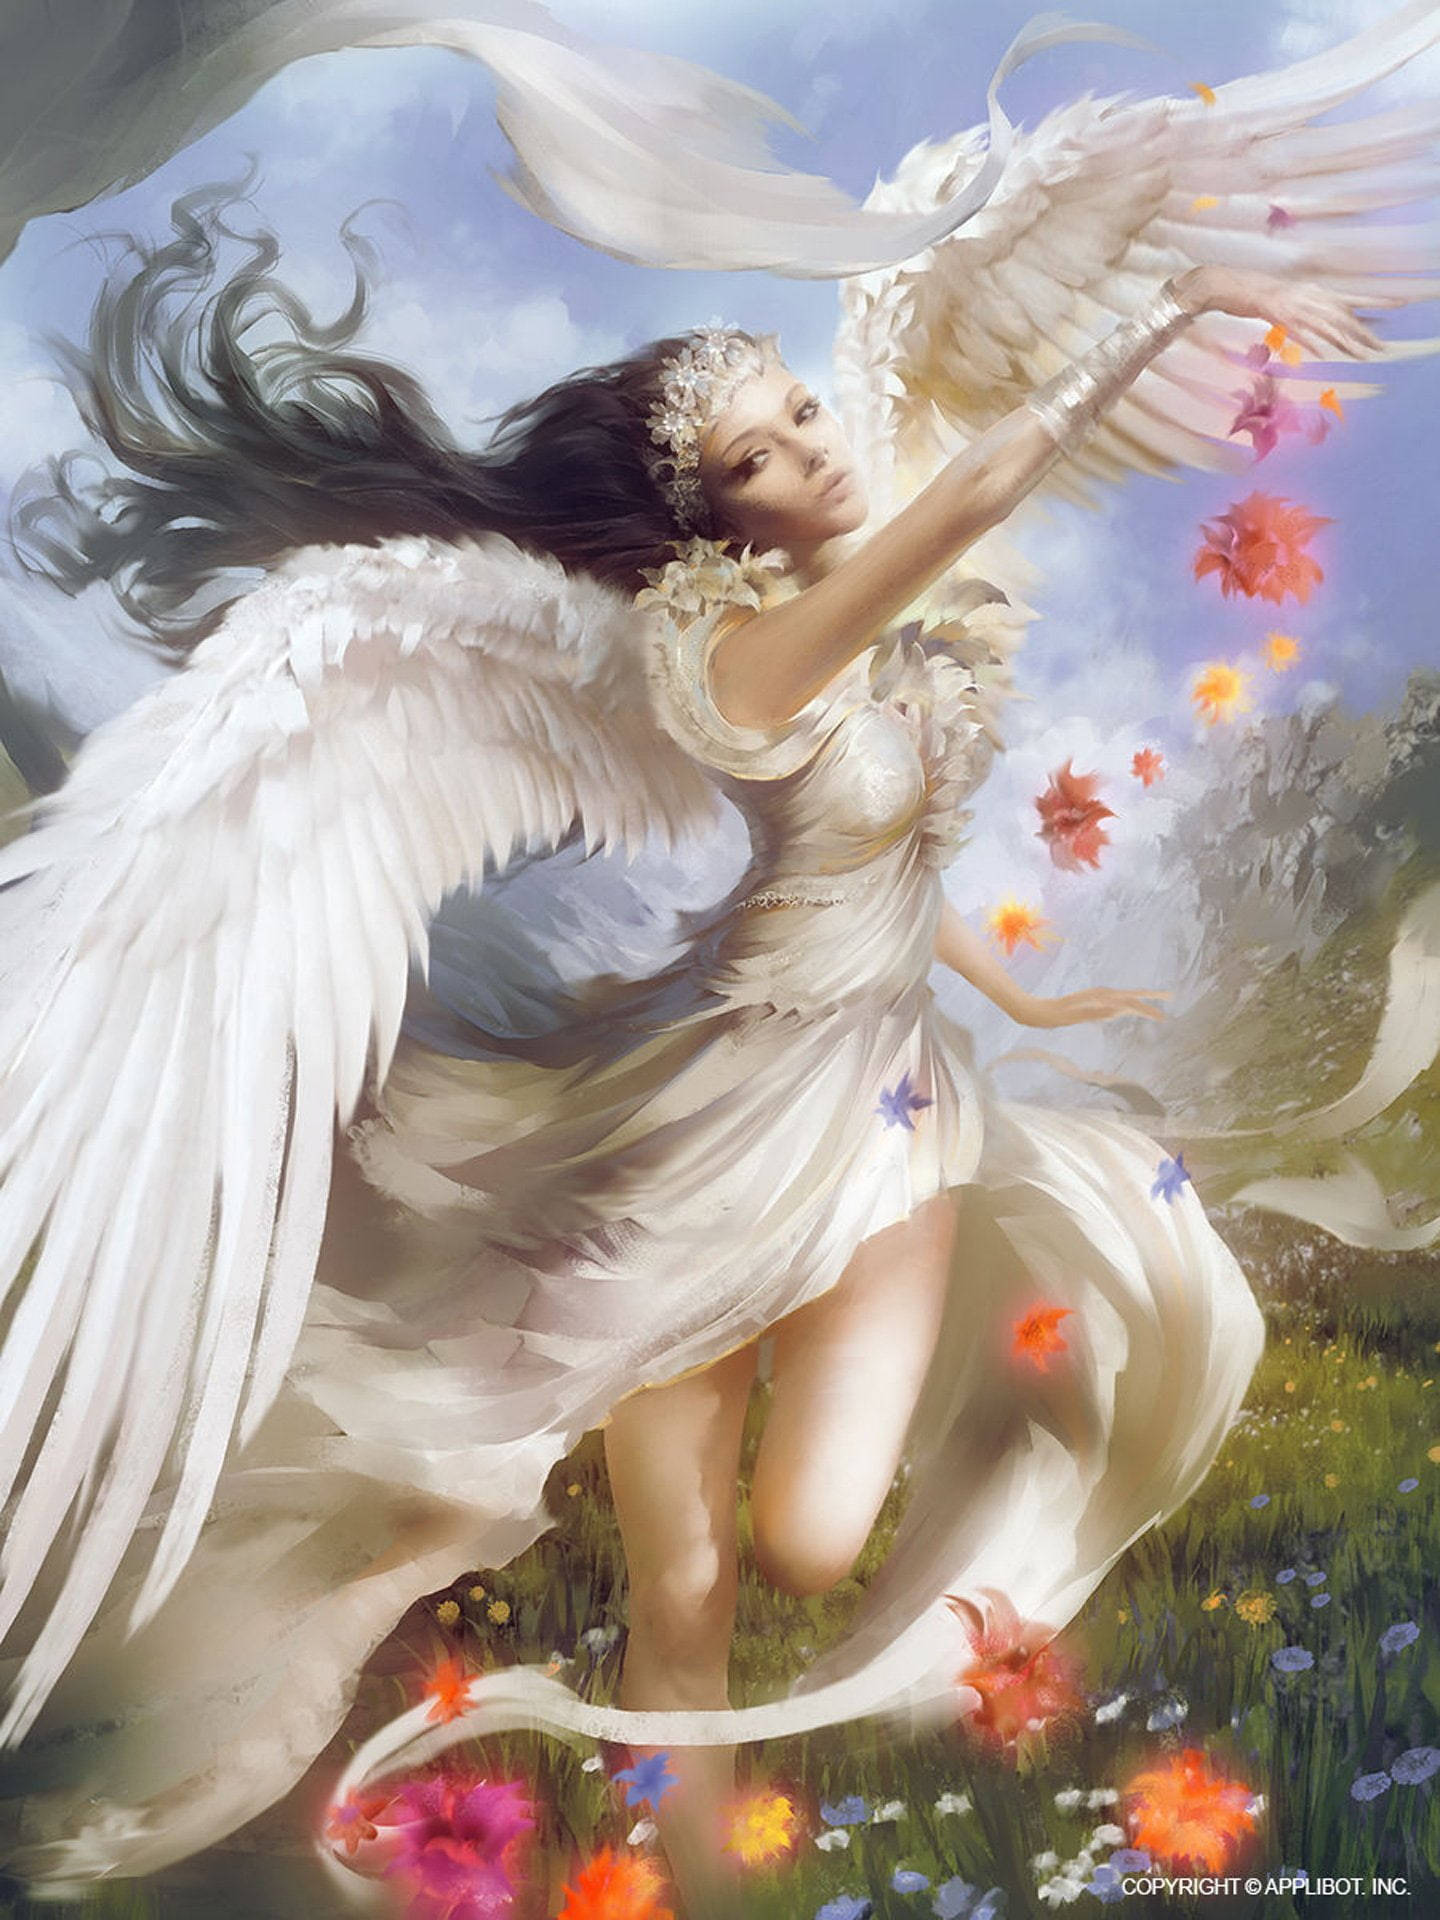 Caption: Ethereal Beauty - Stunning Angels amongst Blooms Wallpaper